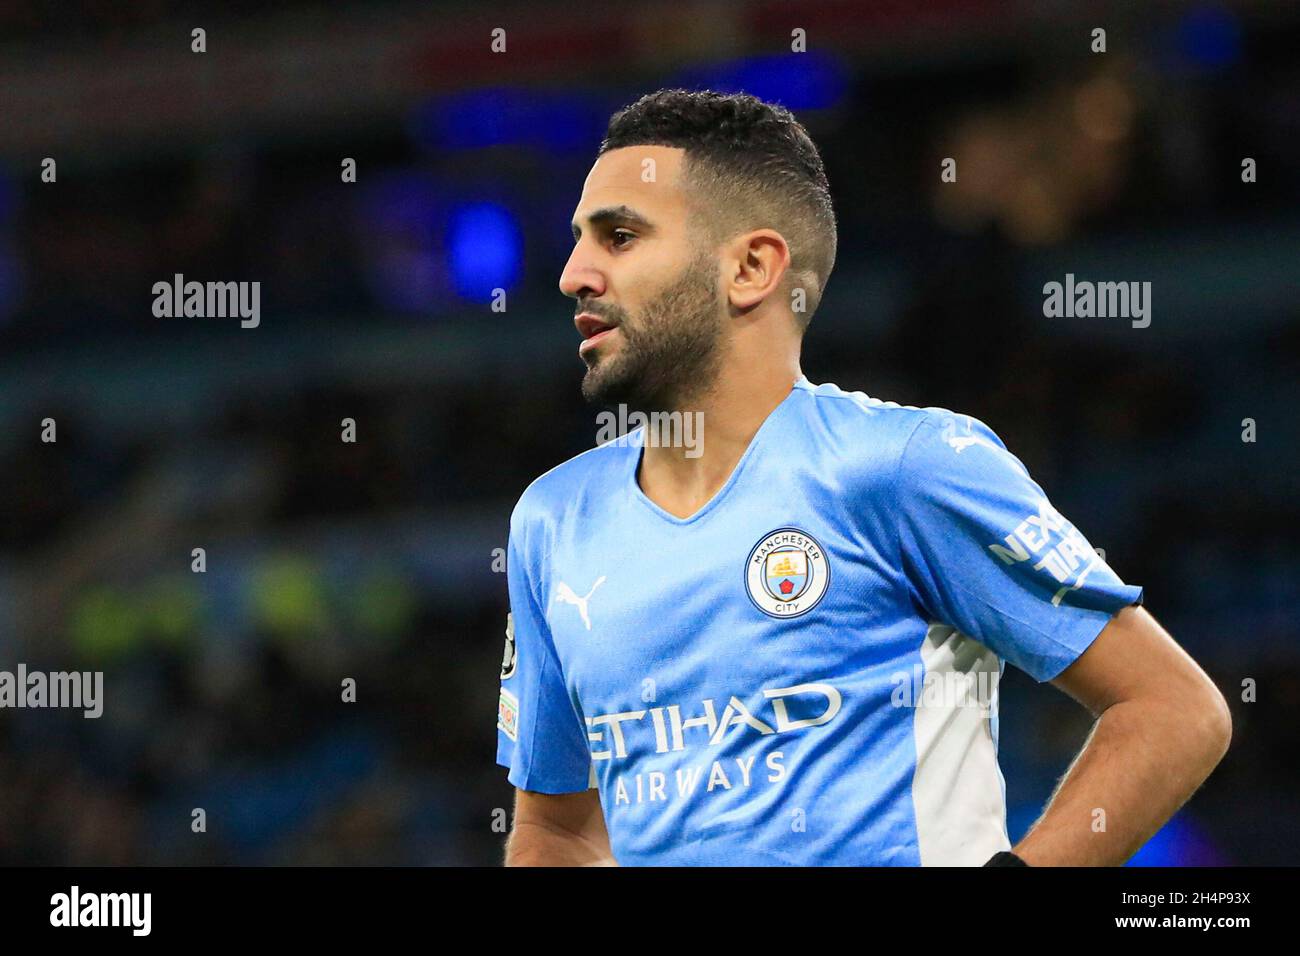 Manchester, UK. 03rd Nov, 2021. Riyad Mahrez #26 of Manchester City in Manchester, United Kingdom on 11/3/2021. (Photo by Conor Molloy/News Images/Sipa USA) Credit: Sipa USA/Alamy Live News Stock Photo